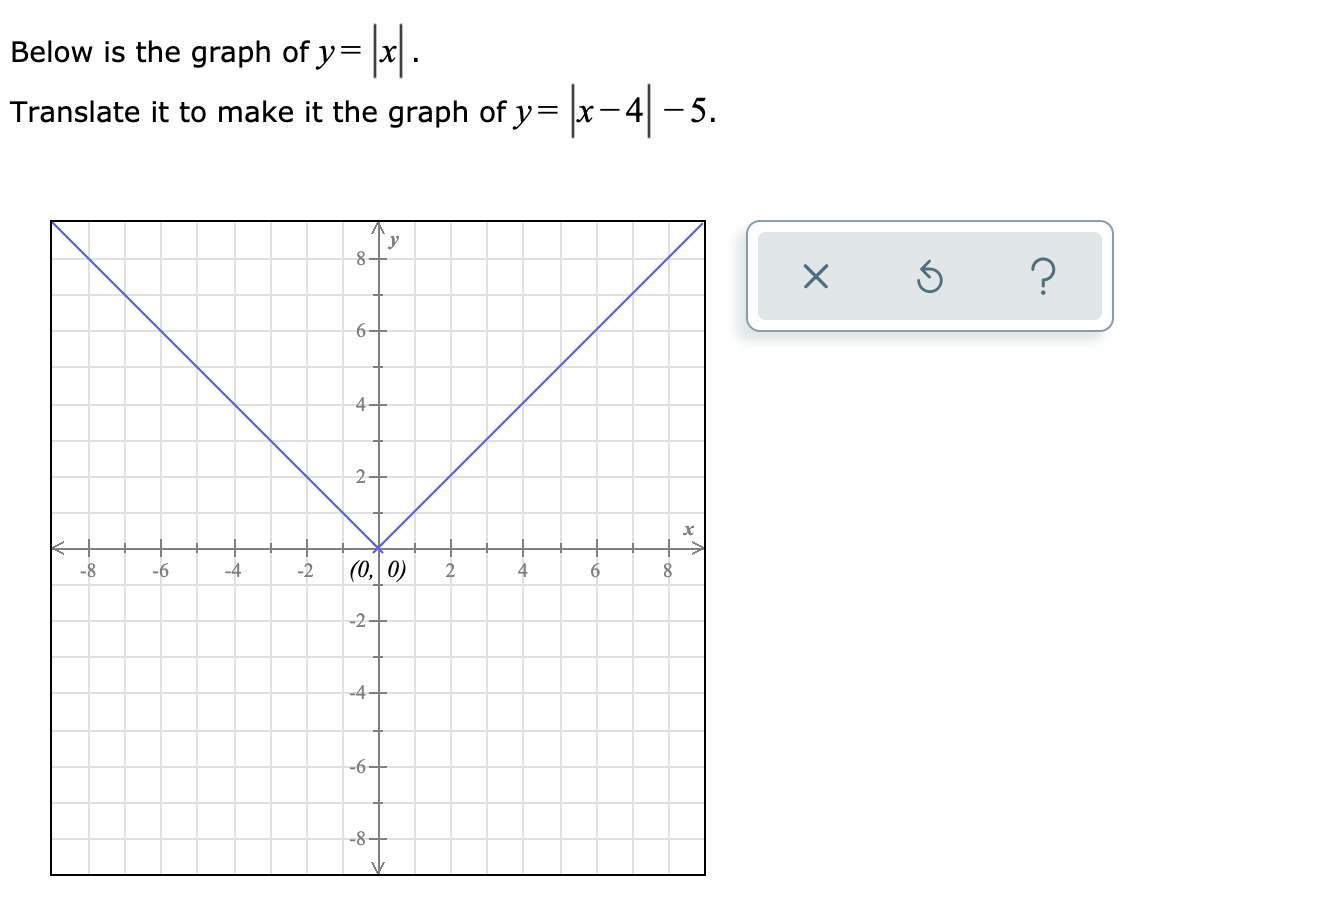 Below is the graph of y= |x|
Translate it to make it the graph of y= x-4 - 5.
y
6-
4-
2
|(0, 0)
-8
-6
-4
-2
6.
8
4,
